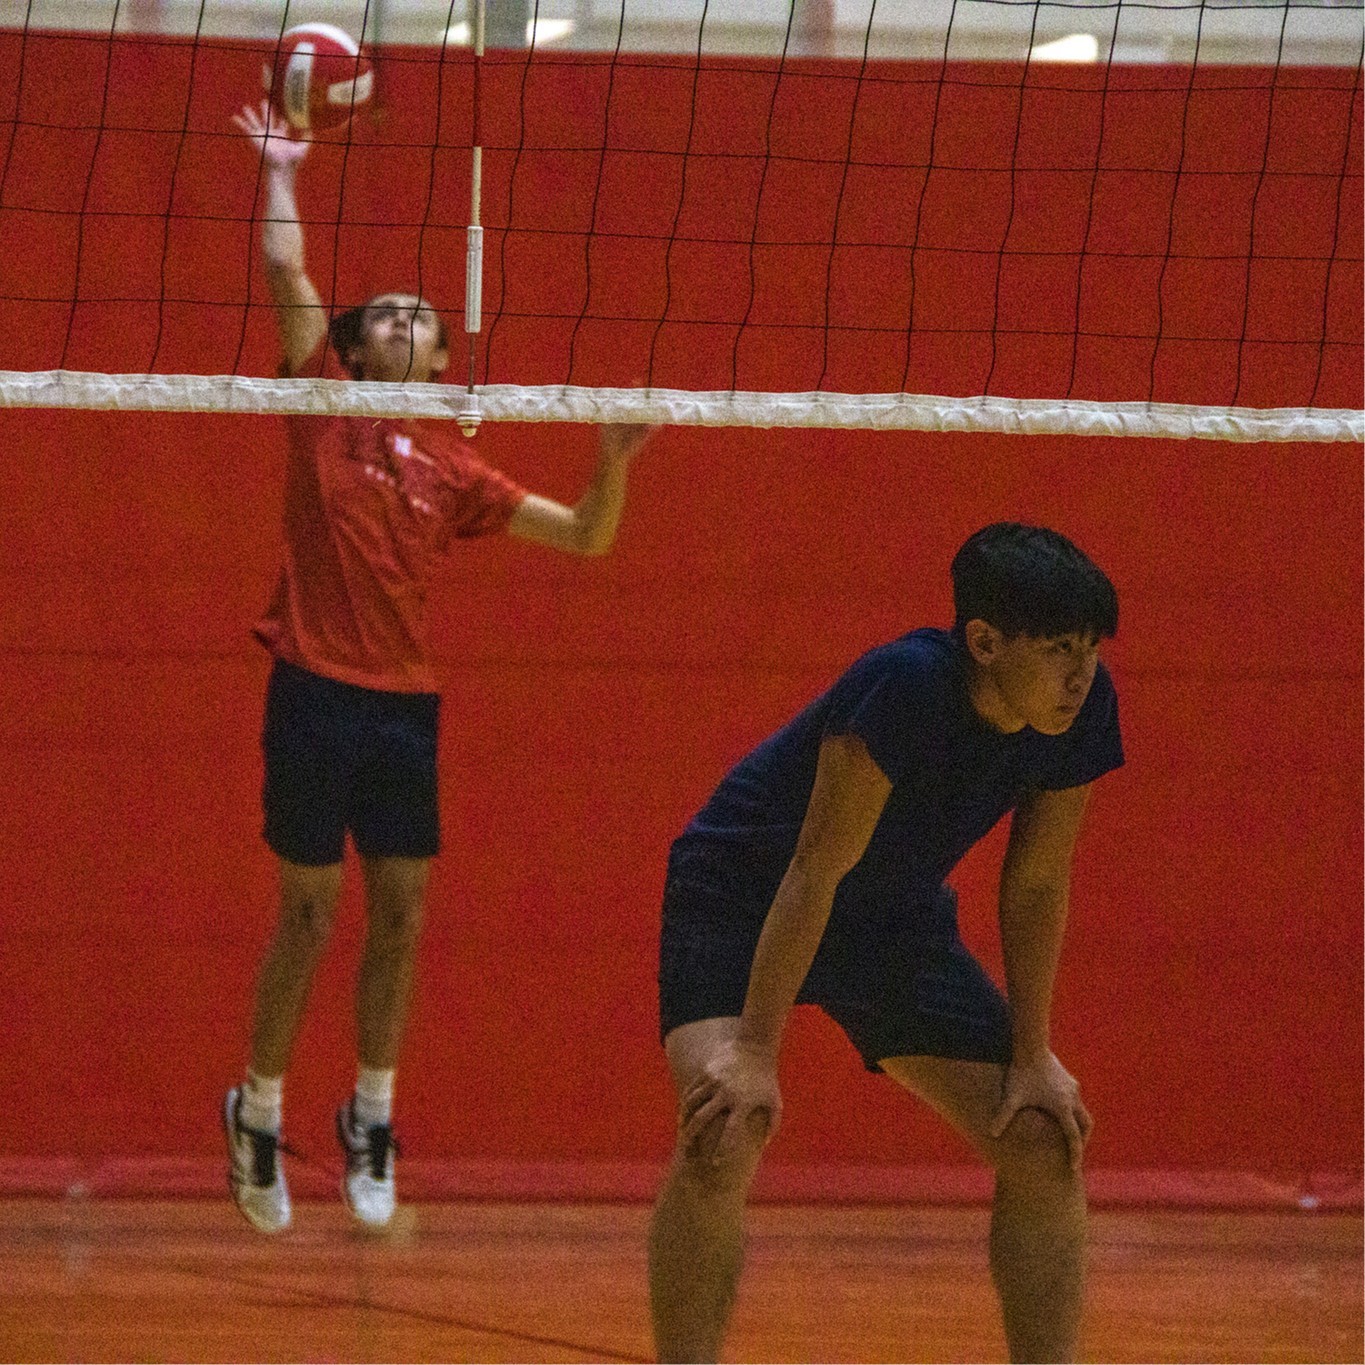 The deadline to sign up for Indoor Volleyball is 5 p.m. on October 13.